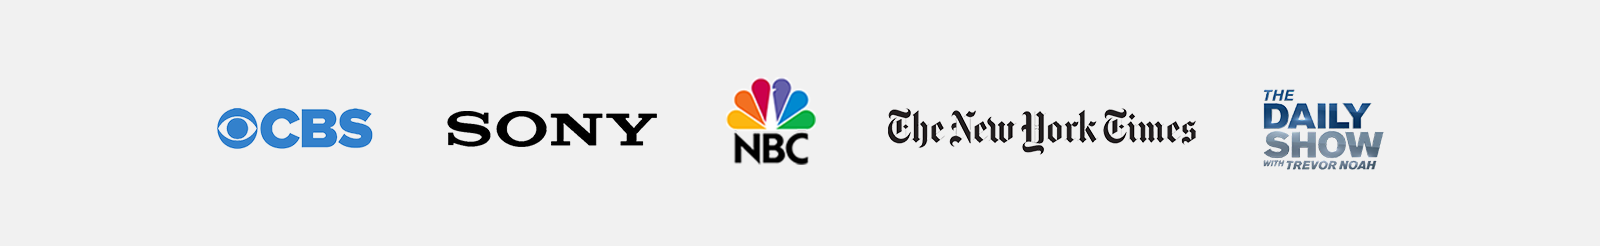 prosound is trusted by cbs, ony, nbc, the new york times, the daily show and more